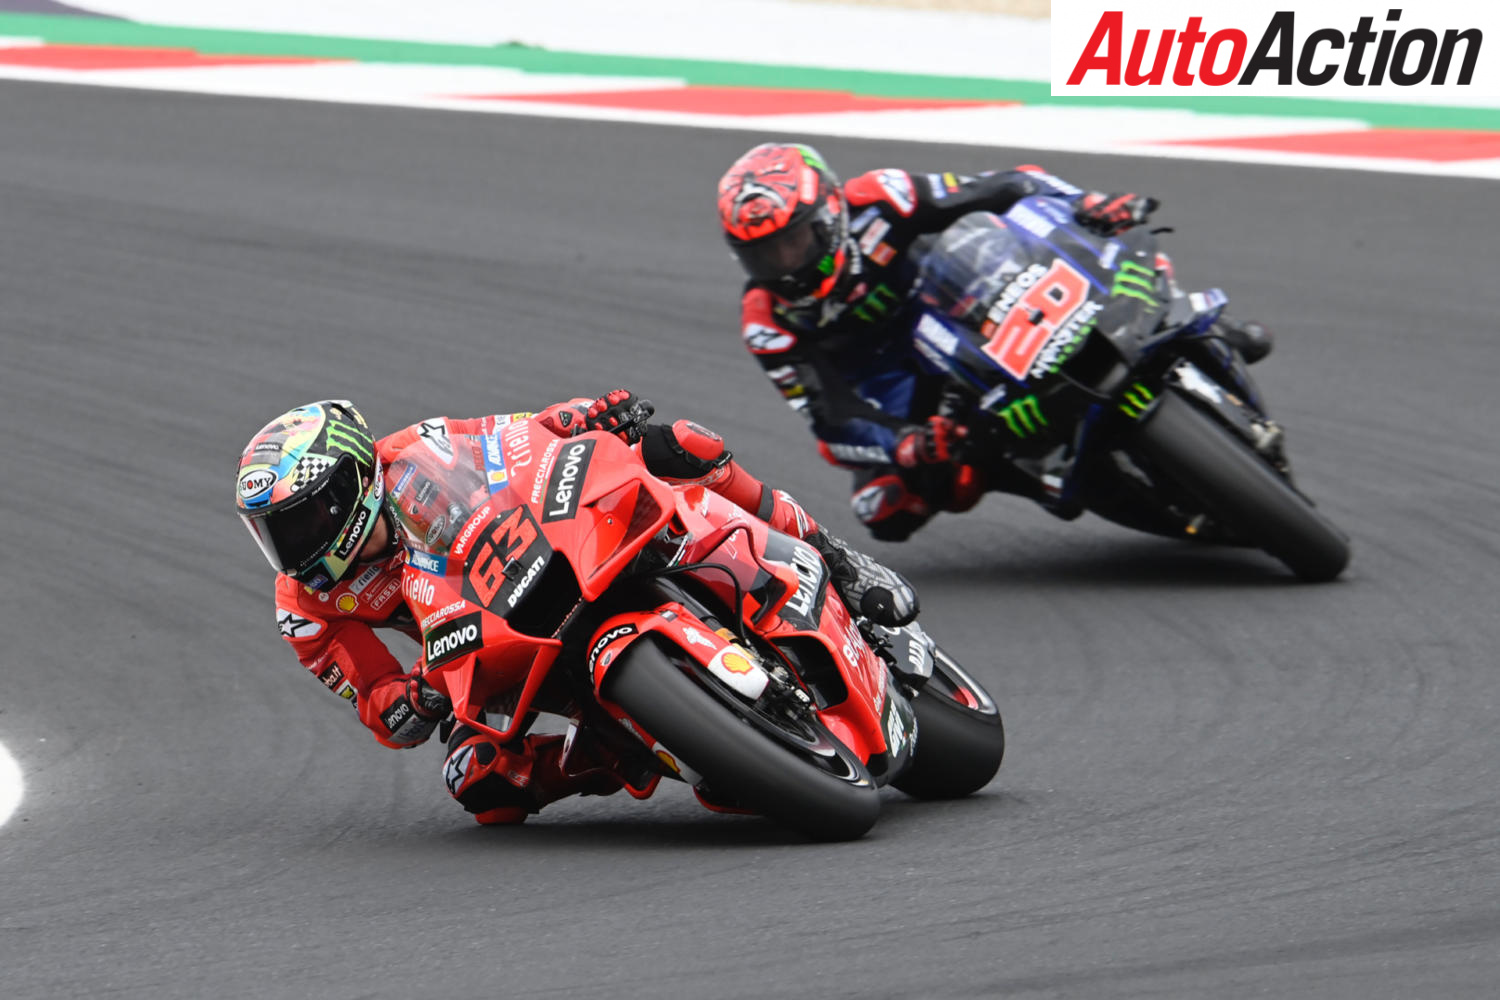 Two in a row for Francesco Bagnaia - Image: Motorsport Images